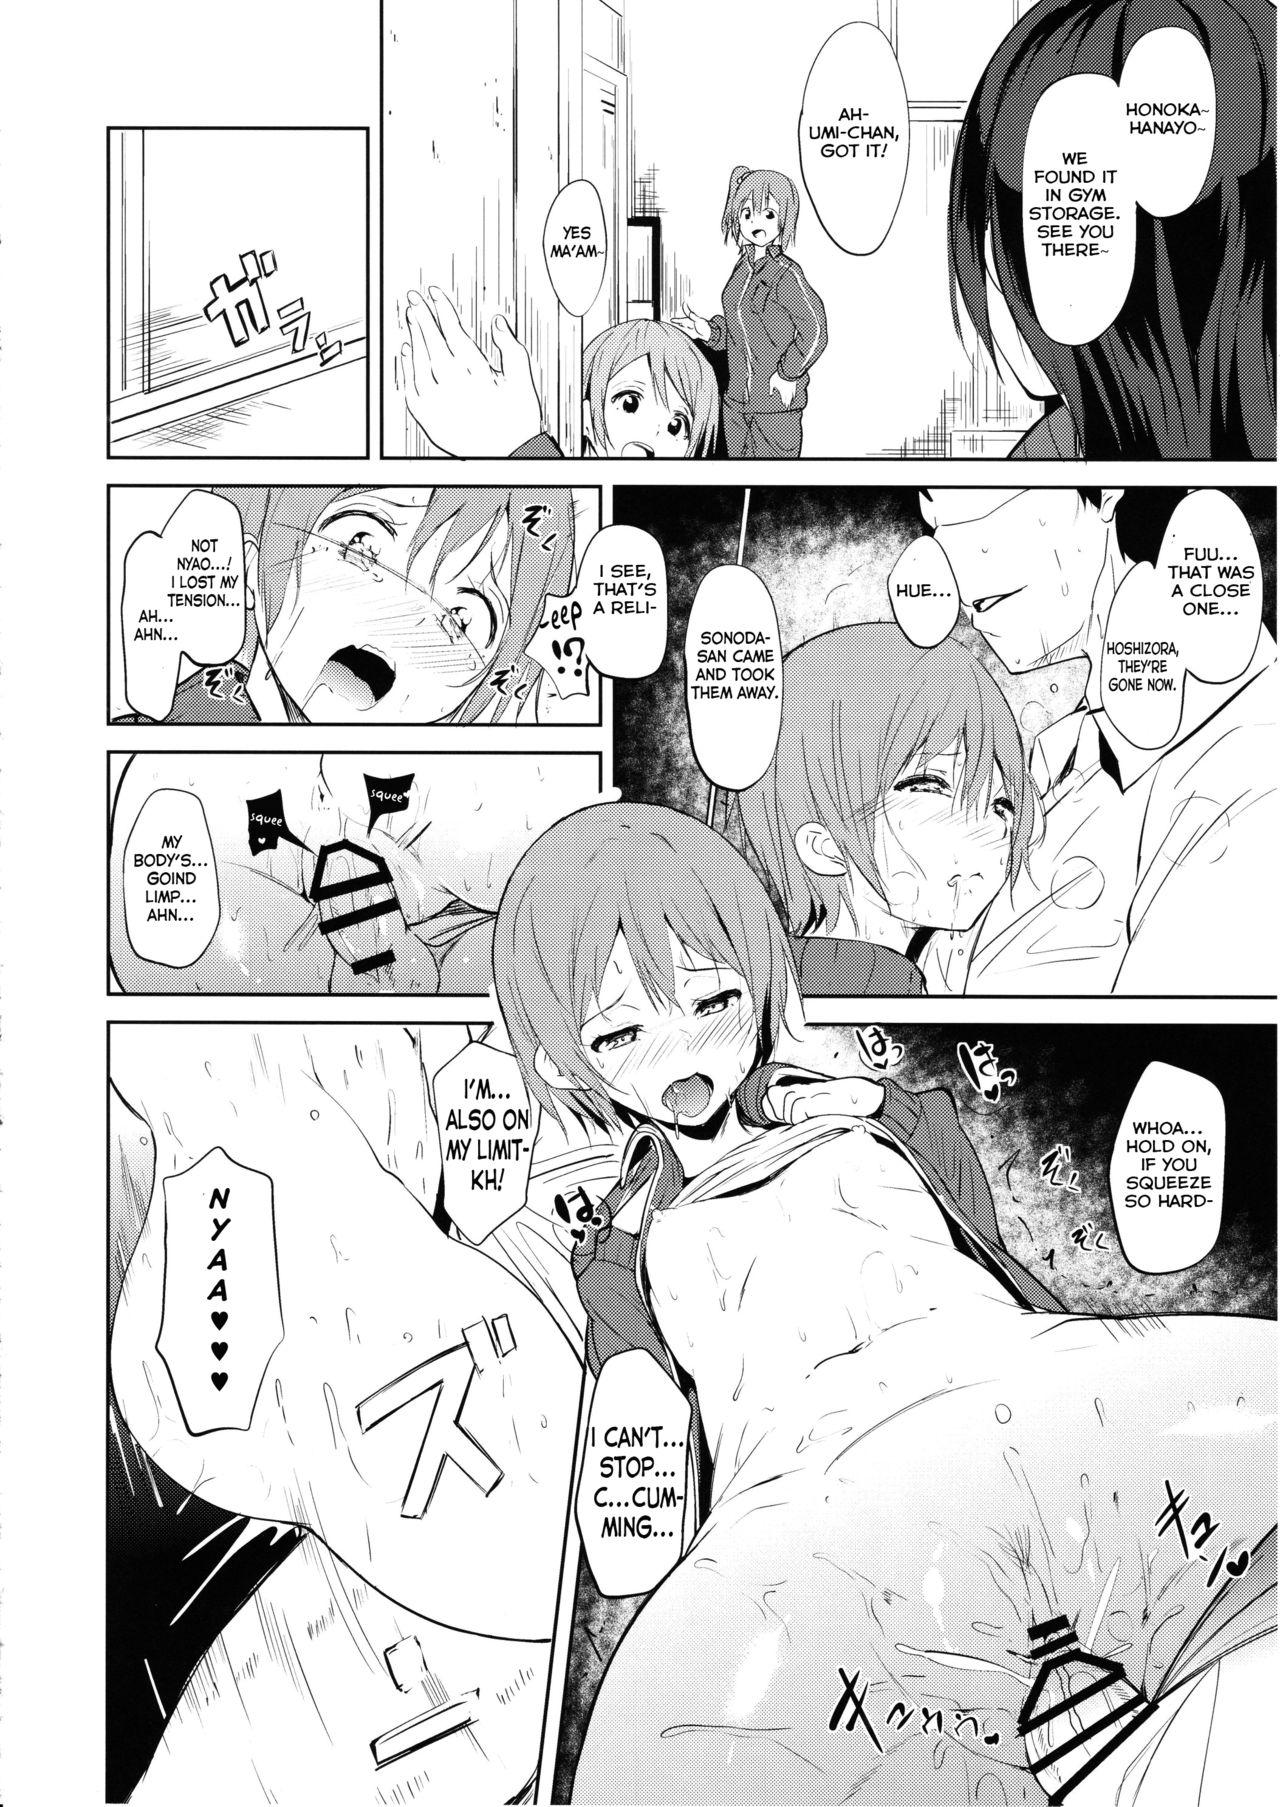 Hymen CHARM RING - Love live Dancing - Page 10